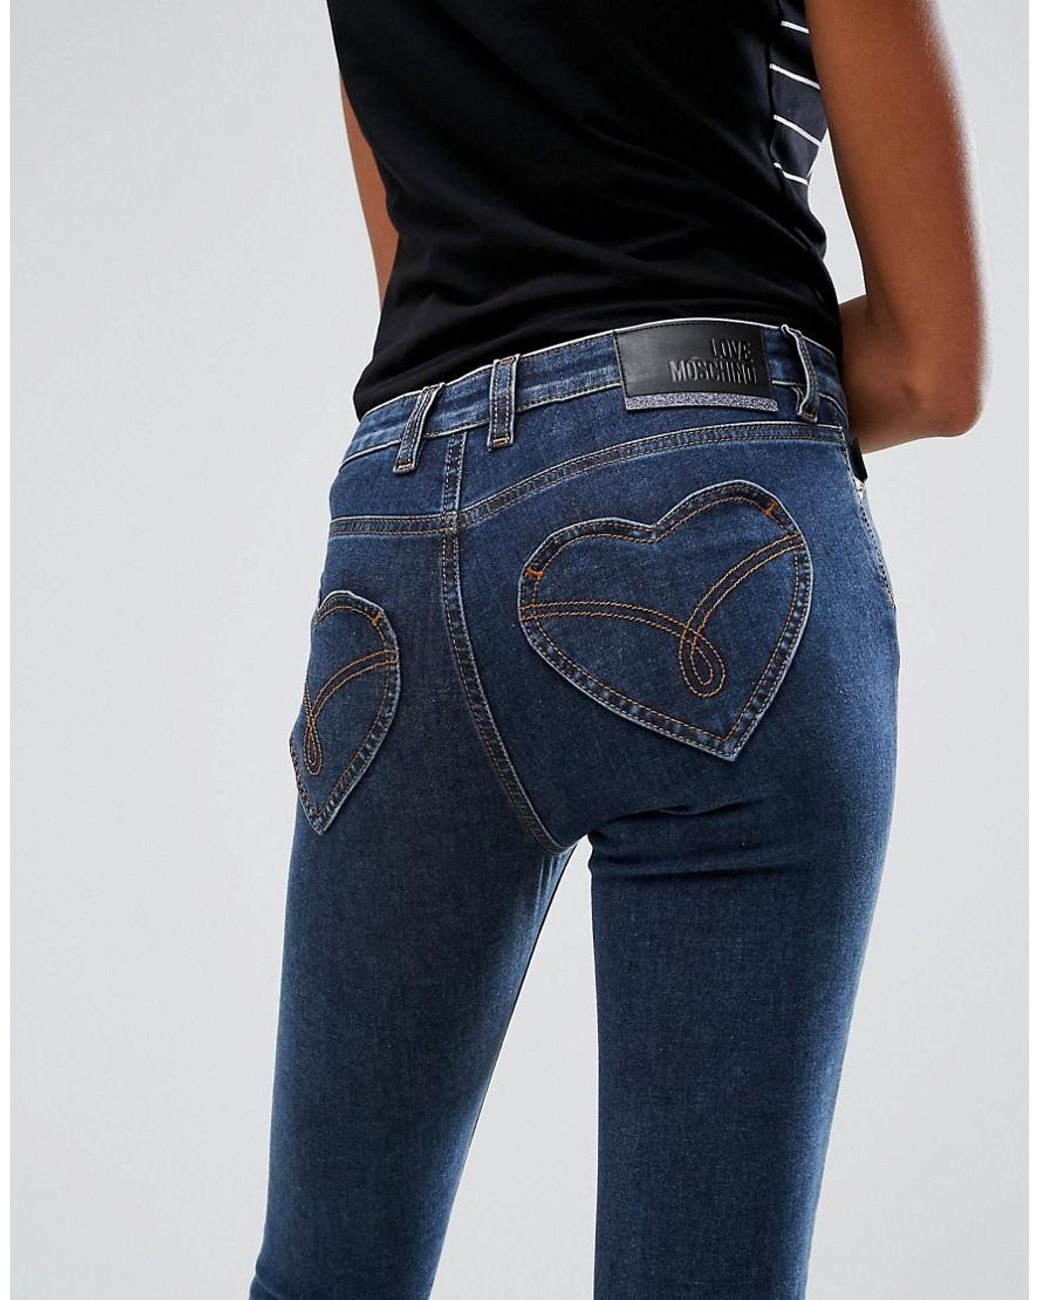 Love Moschino Heart Pocket Jeans in Blue | Lyst